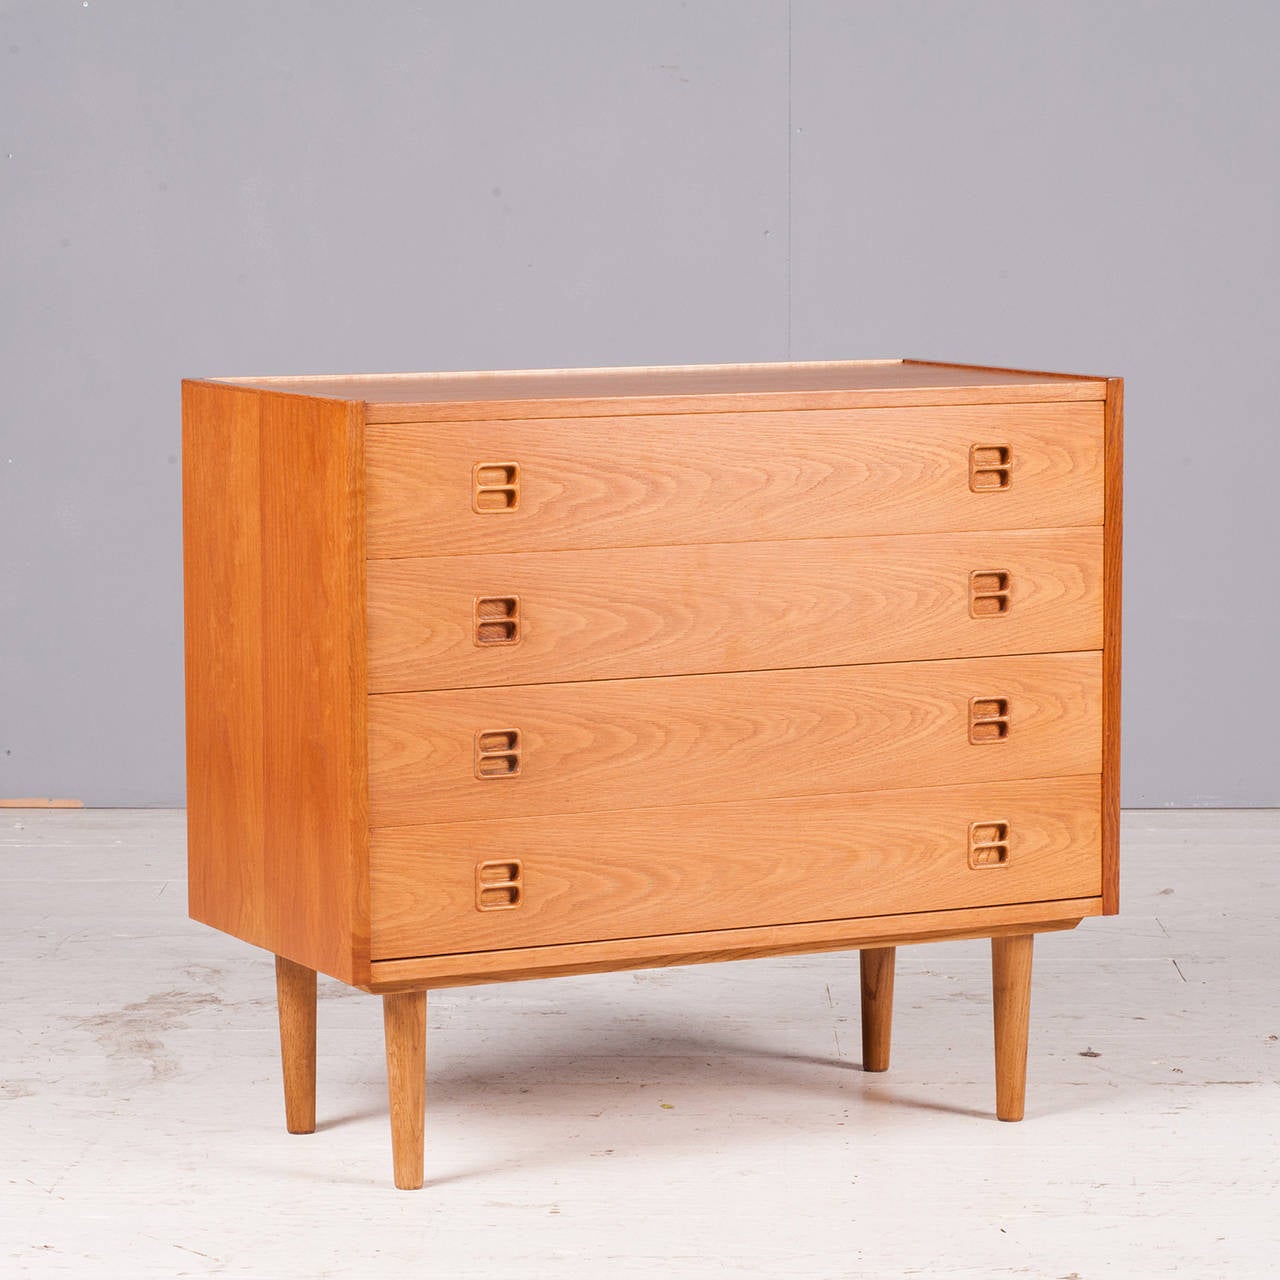 A lovely Danish chest of 4 drawers in Oak. A great size for a small spot, beautifully restored in Melbourne. Featuring lovely streamline handles and tapered legs.